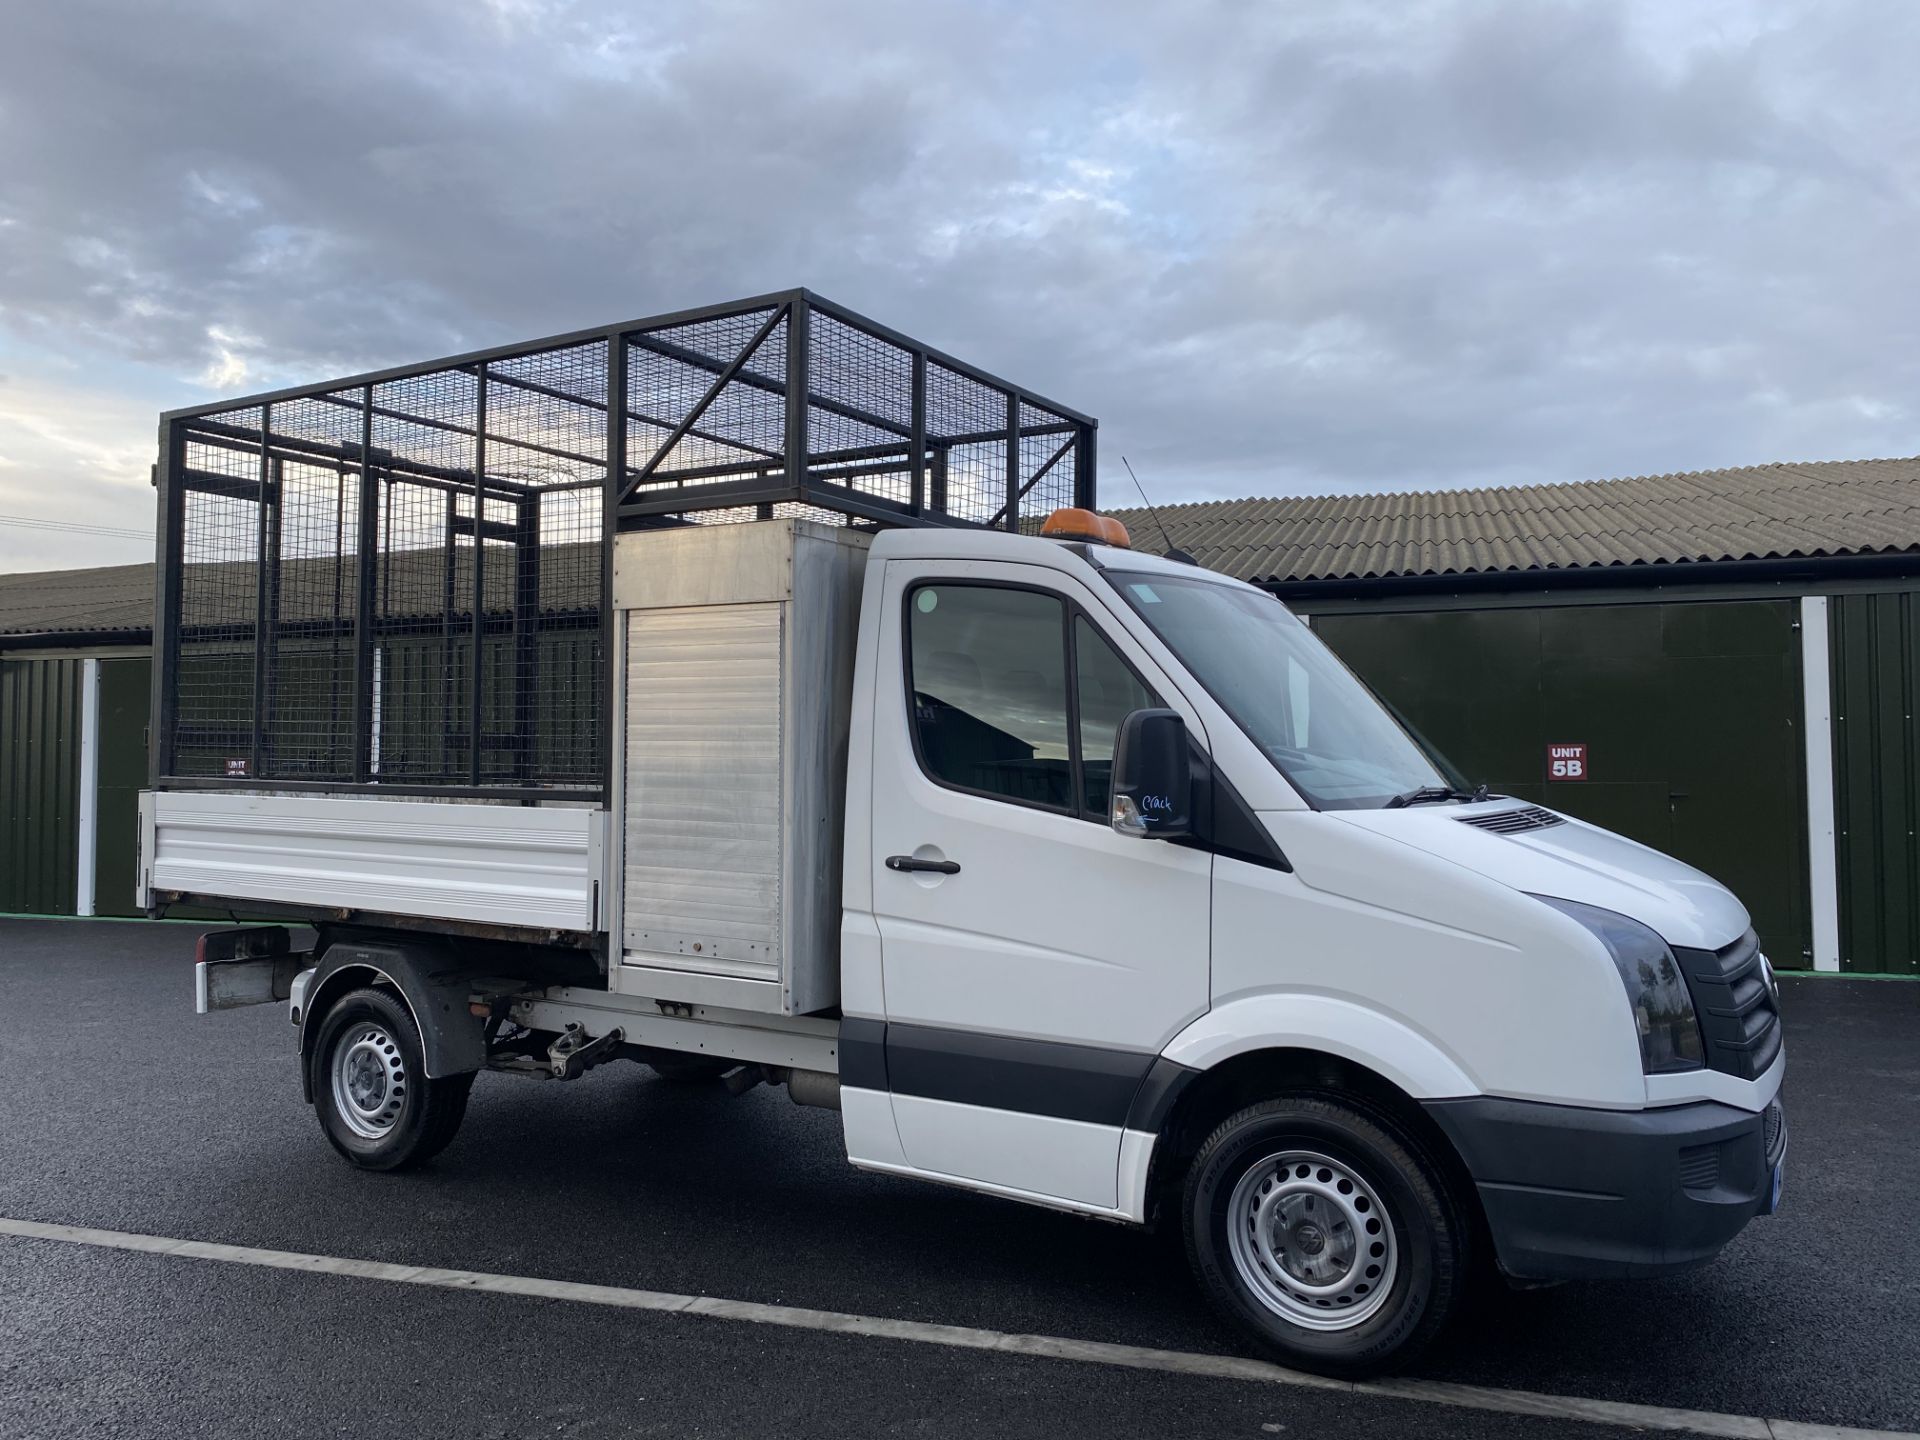 (On Sale) VOLKSWAGEN CRAFTER CR35 2.0TDI CAGED TIPPER TRUCK - 16 REG - ONLY 35K MILES - 1 OWNER - Image 8 of 8